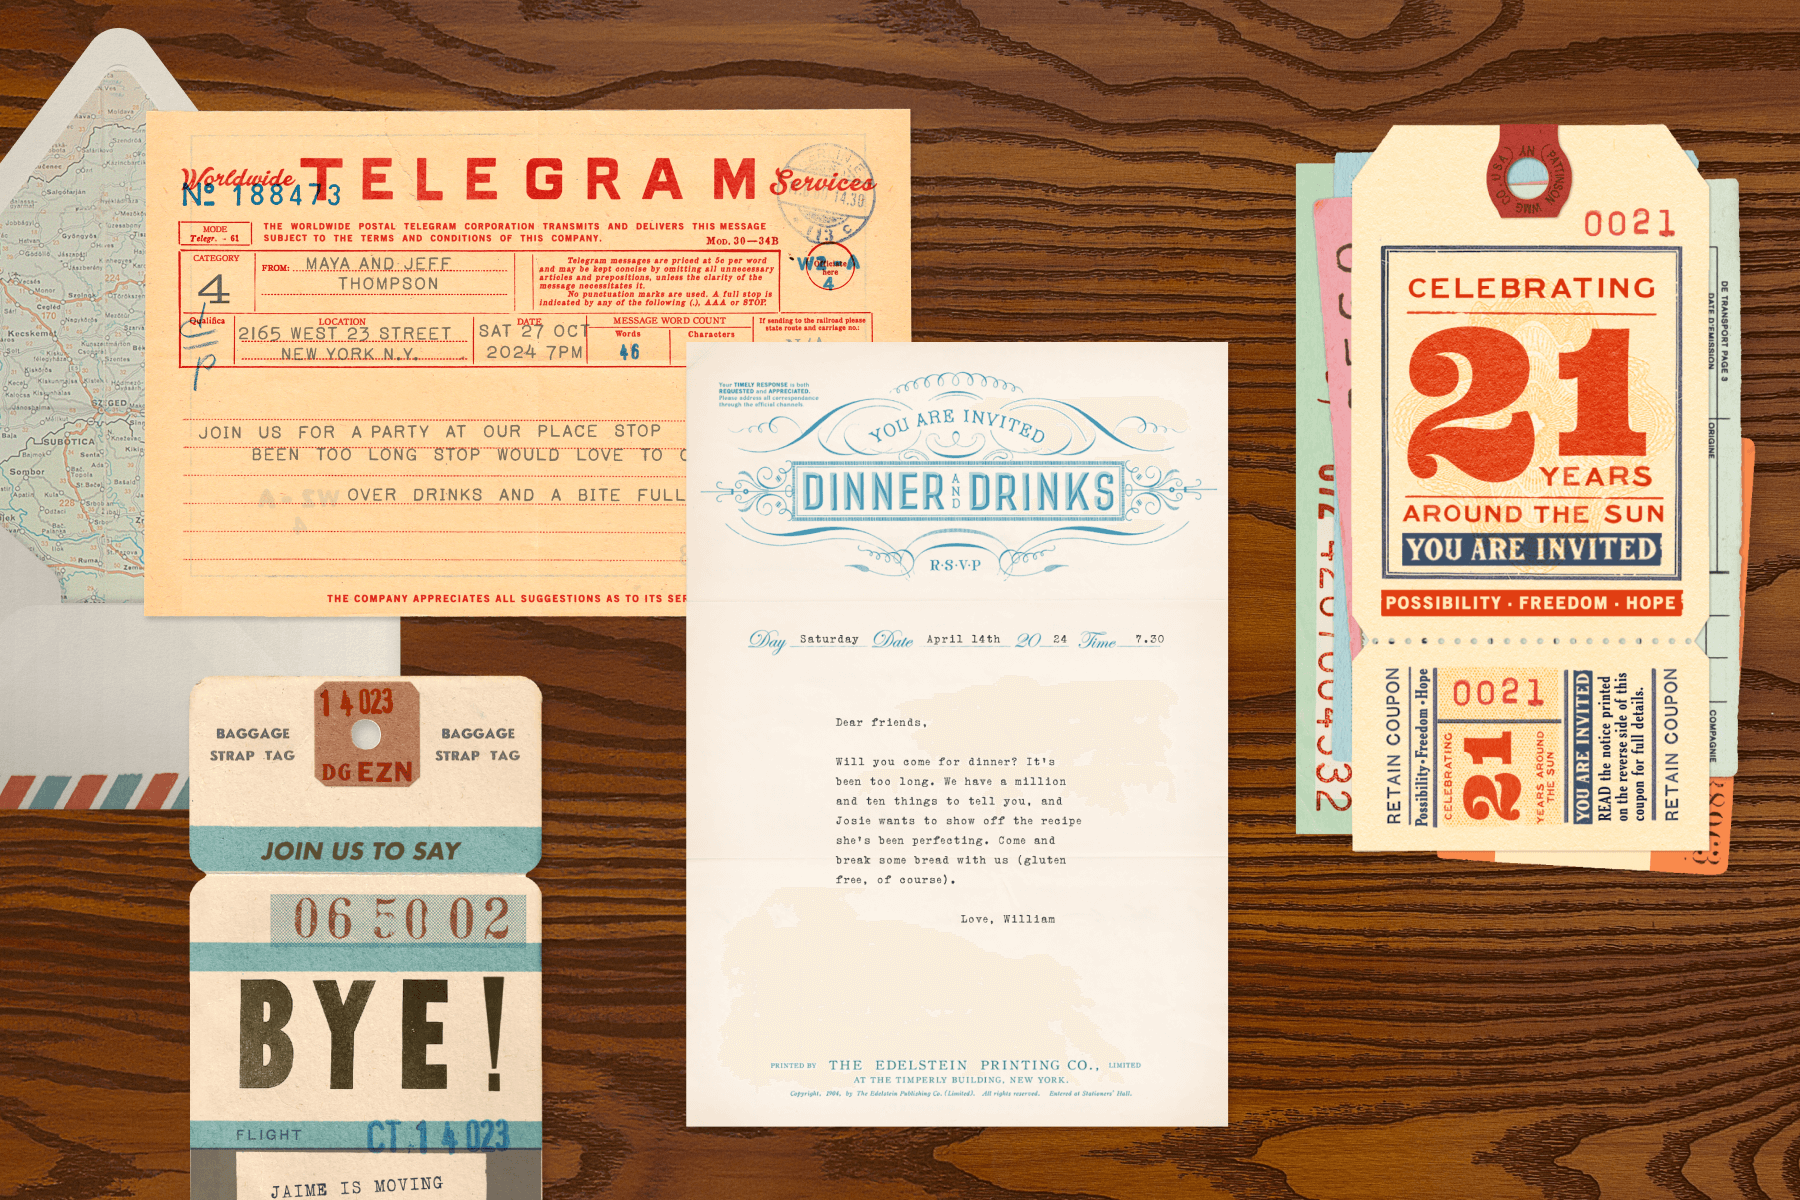 A collection of Annie’s cards; a vintage style telegram invitation with typewriter font; a vintage style travel tag with perforated edge and graphic text invitation; a vintage style typewriter invitation with filigree blue accents as a header.